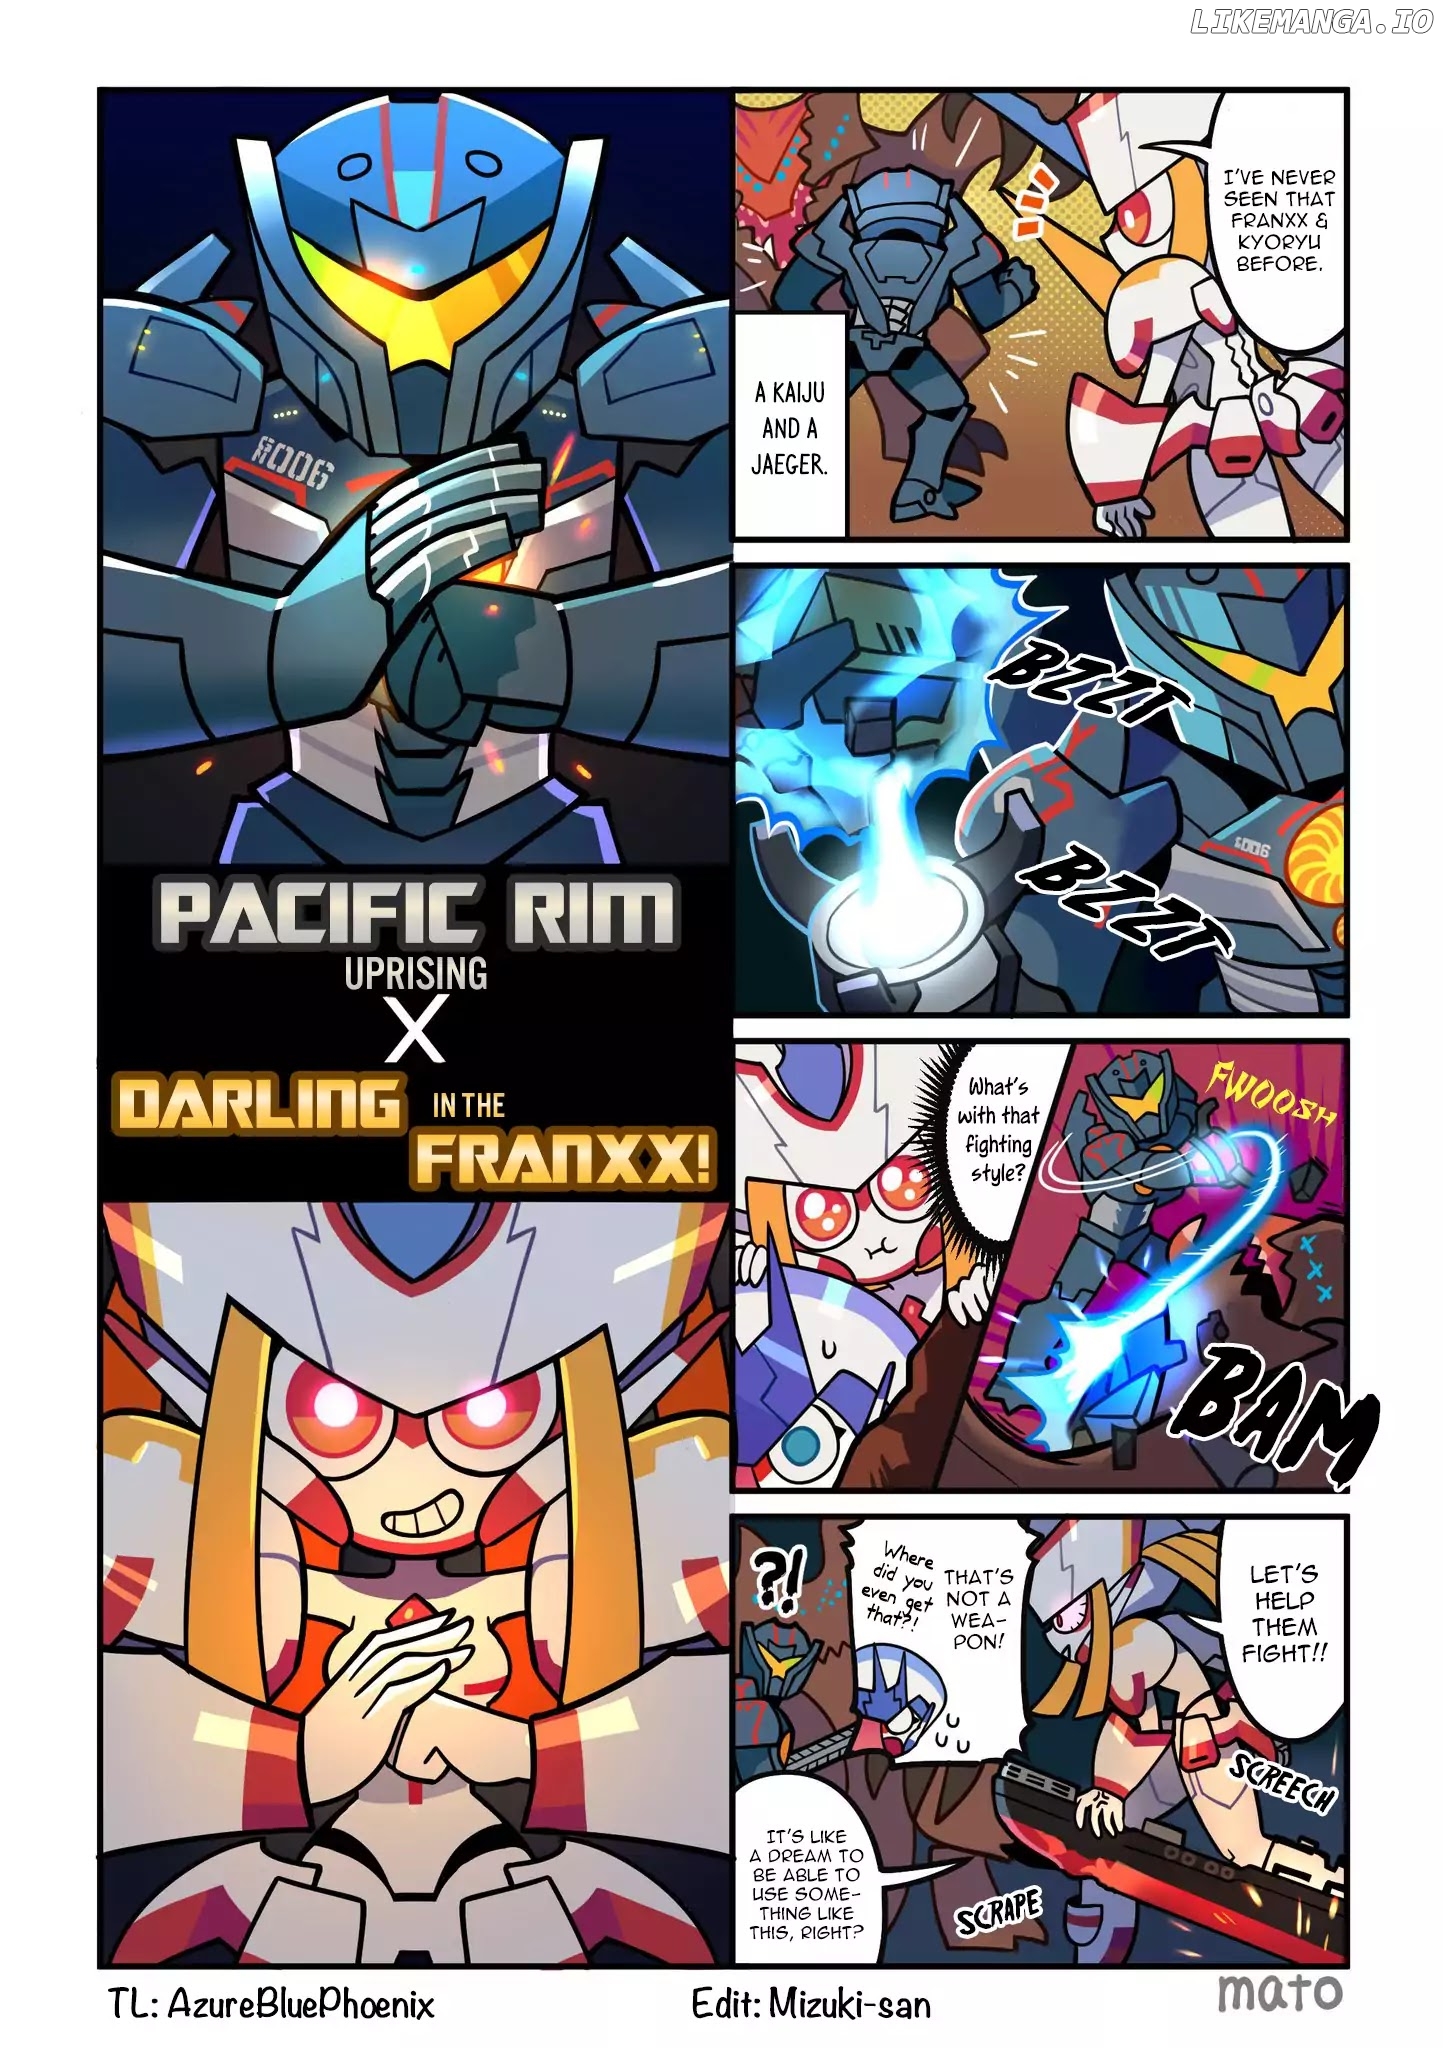 Darling in the FranXX! - 4-koma chapter 39.5 - page 1